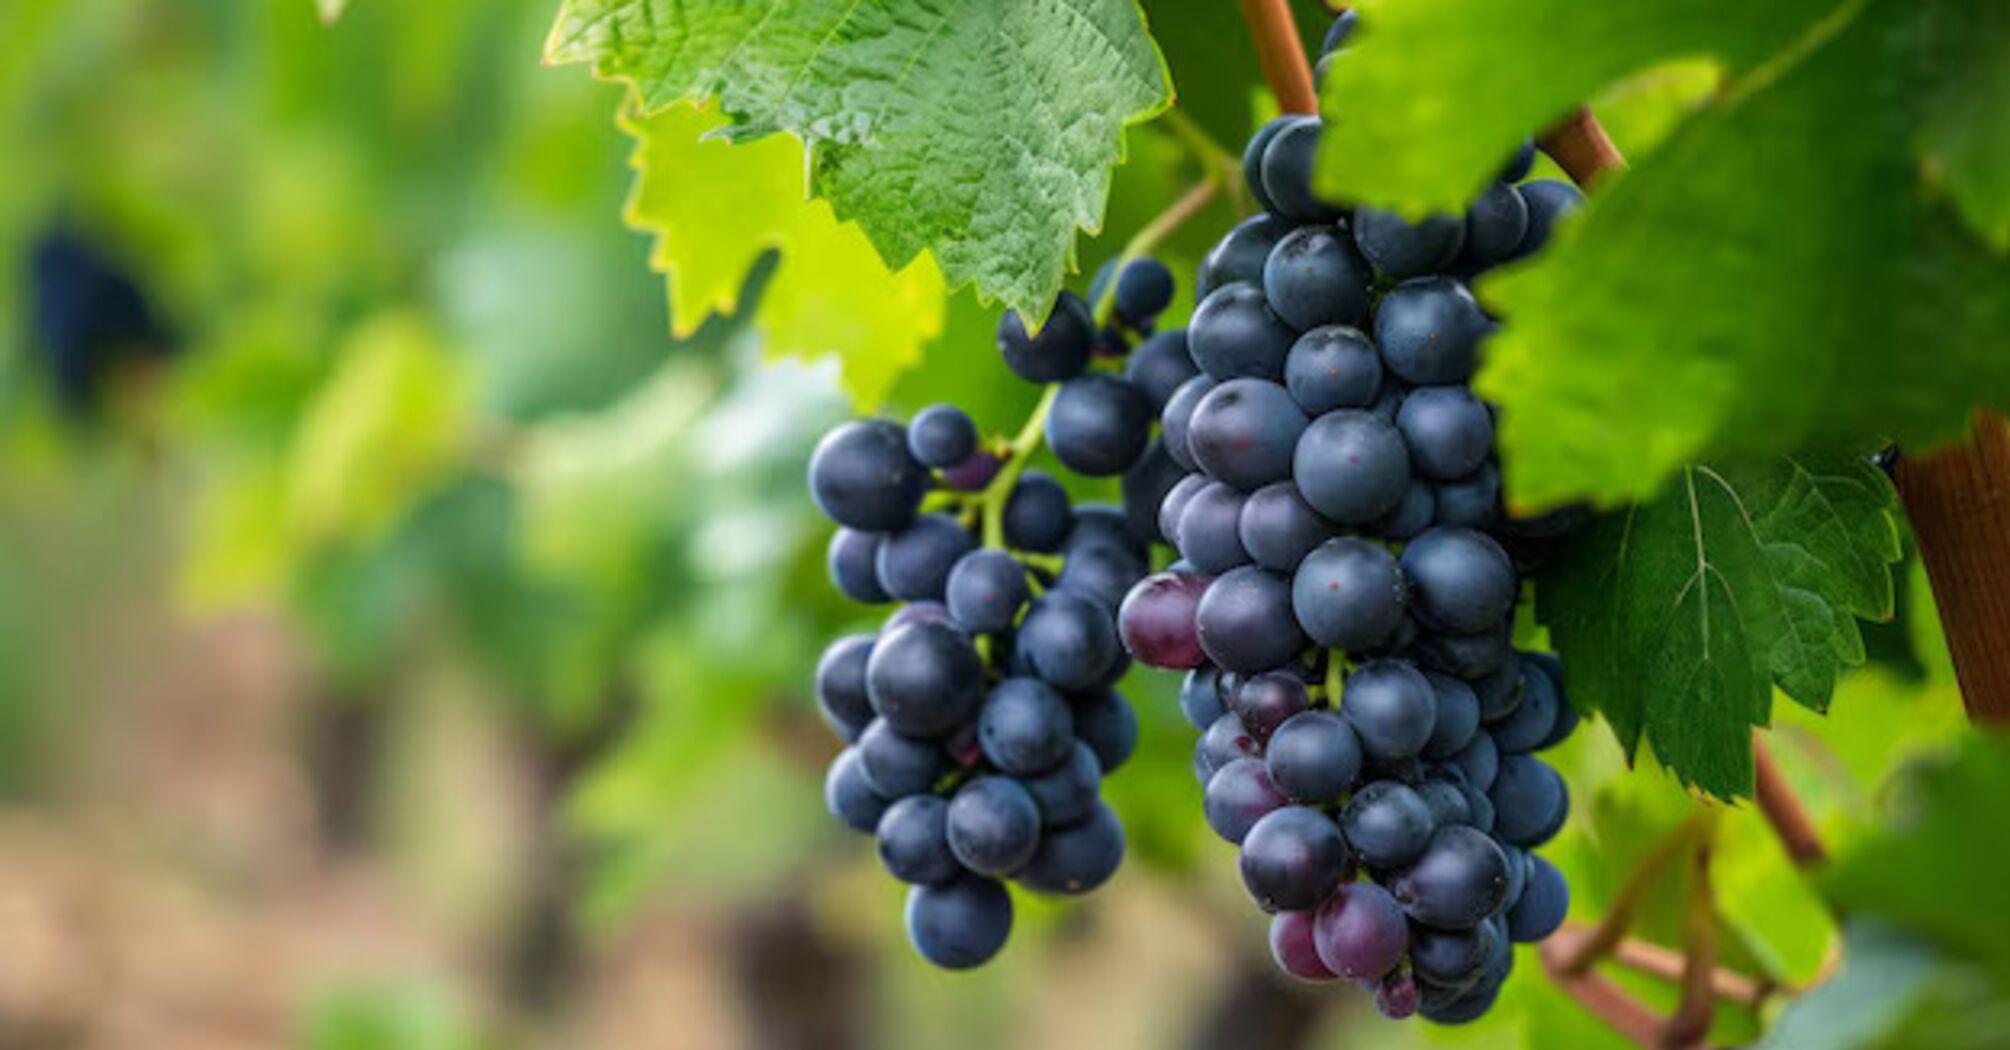 How to ensure a bountiful grape harvest